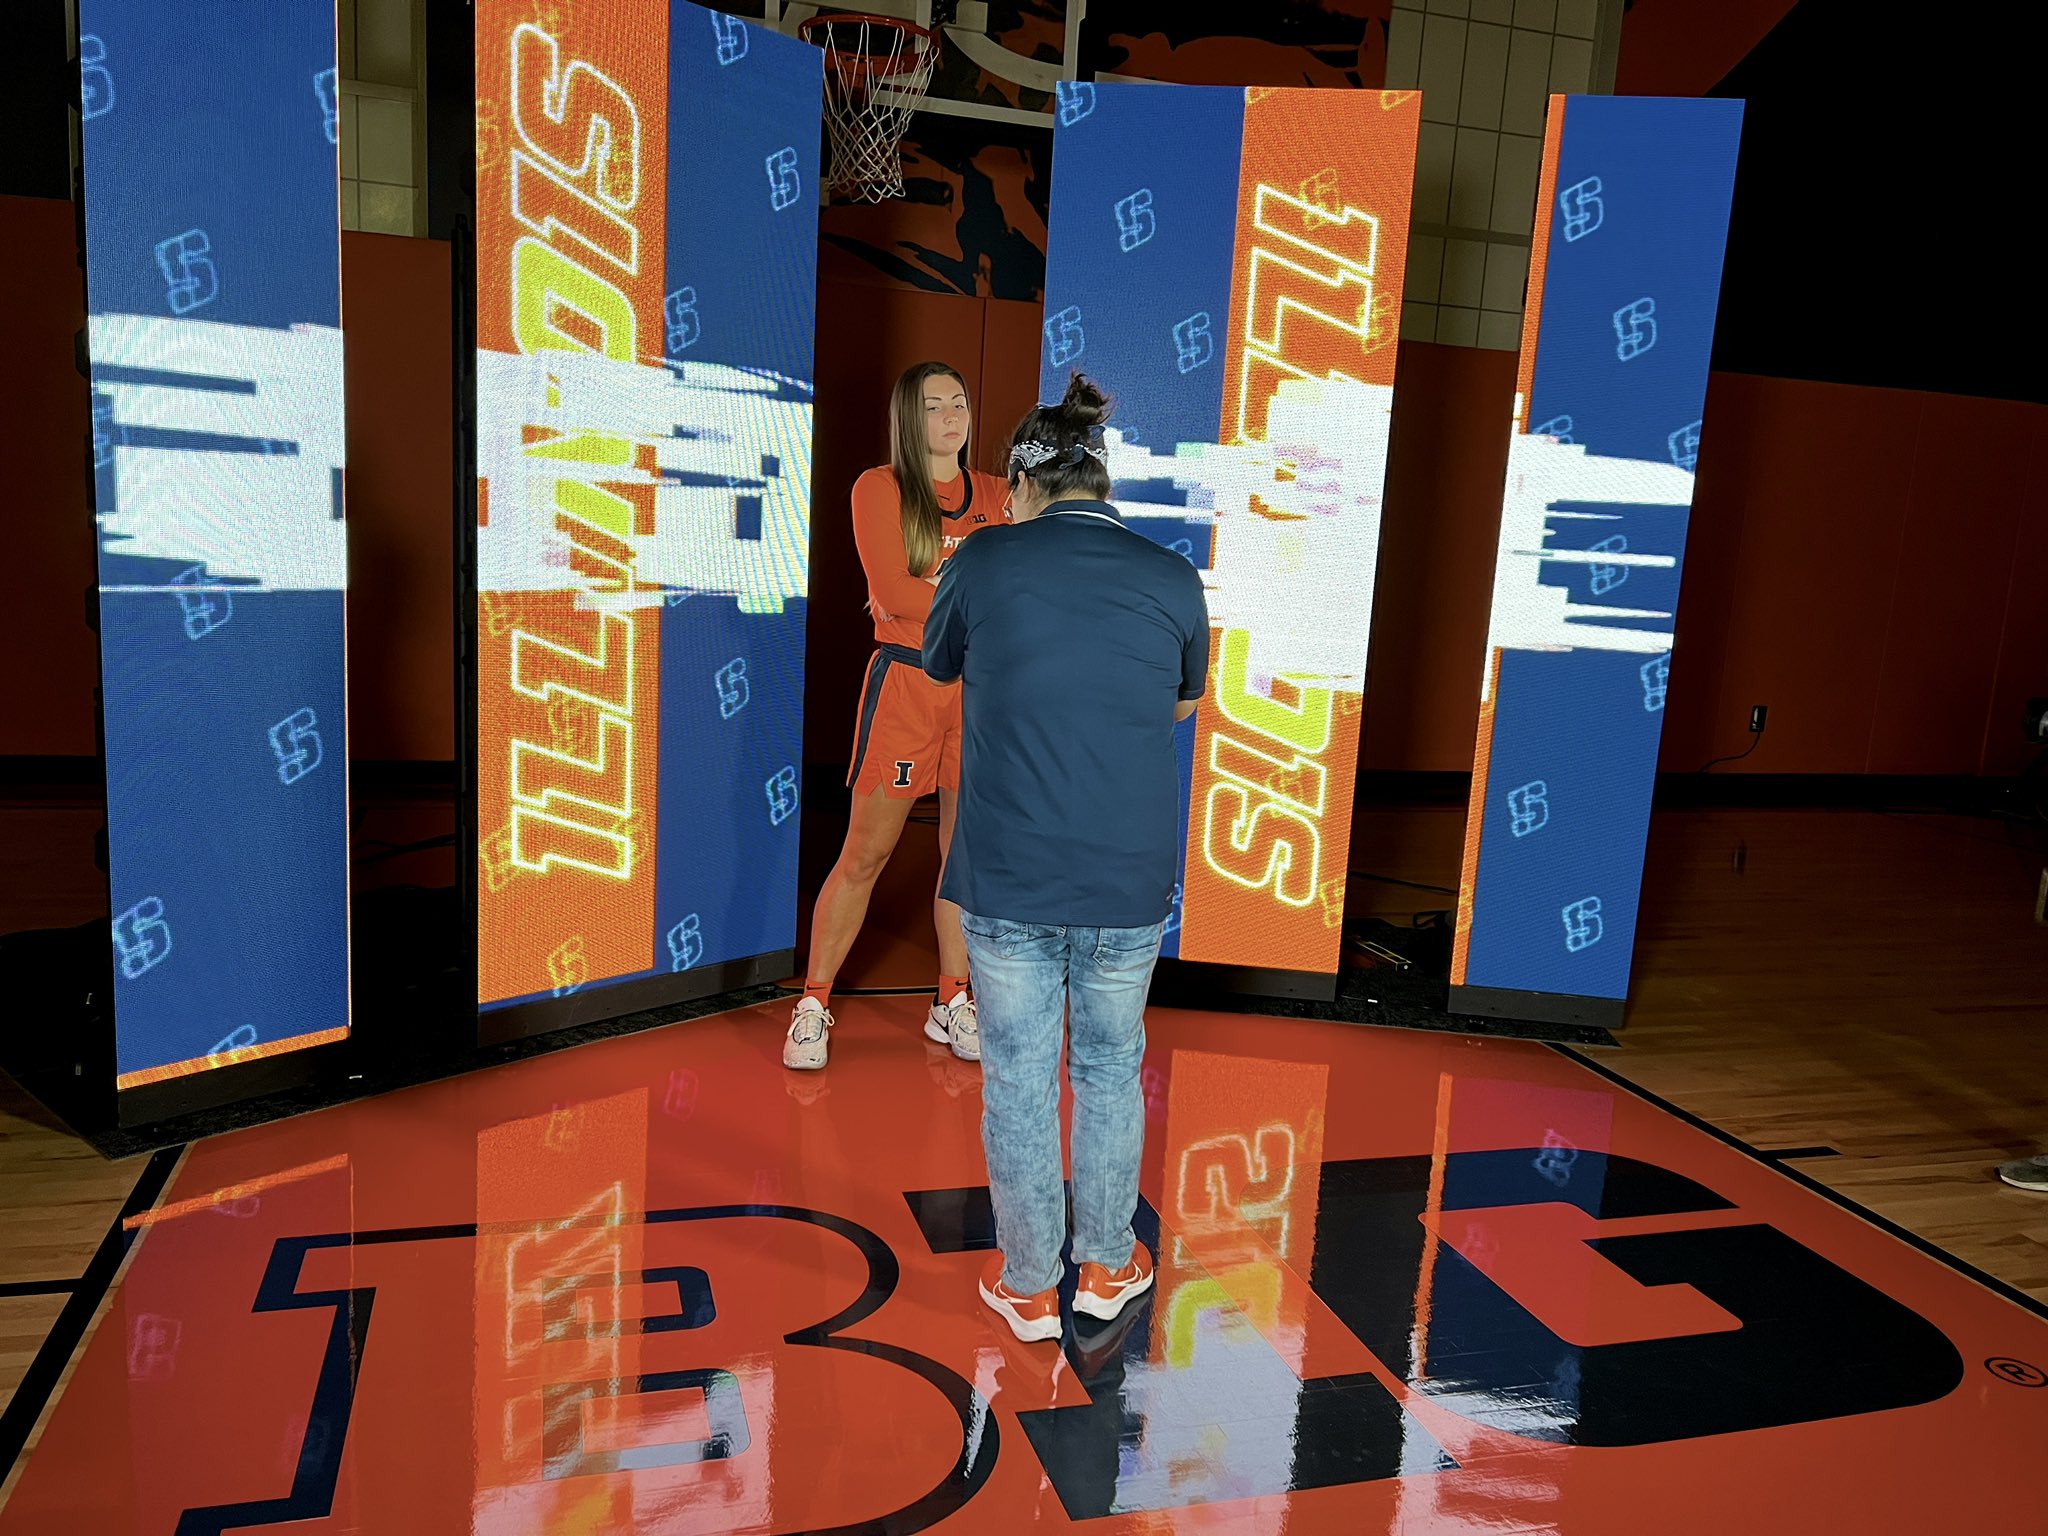 Fighting Illini Athletics Partners with ProhiBet for Innovative